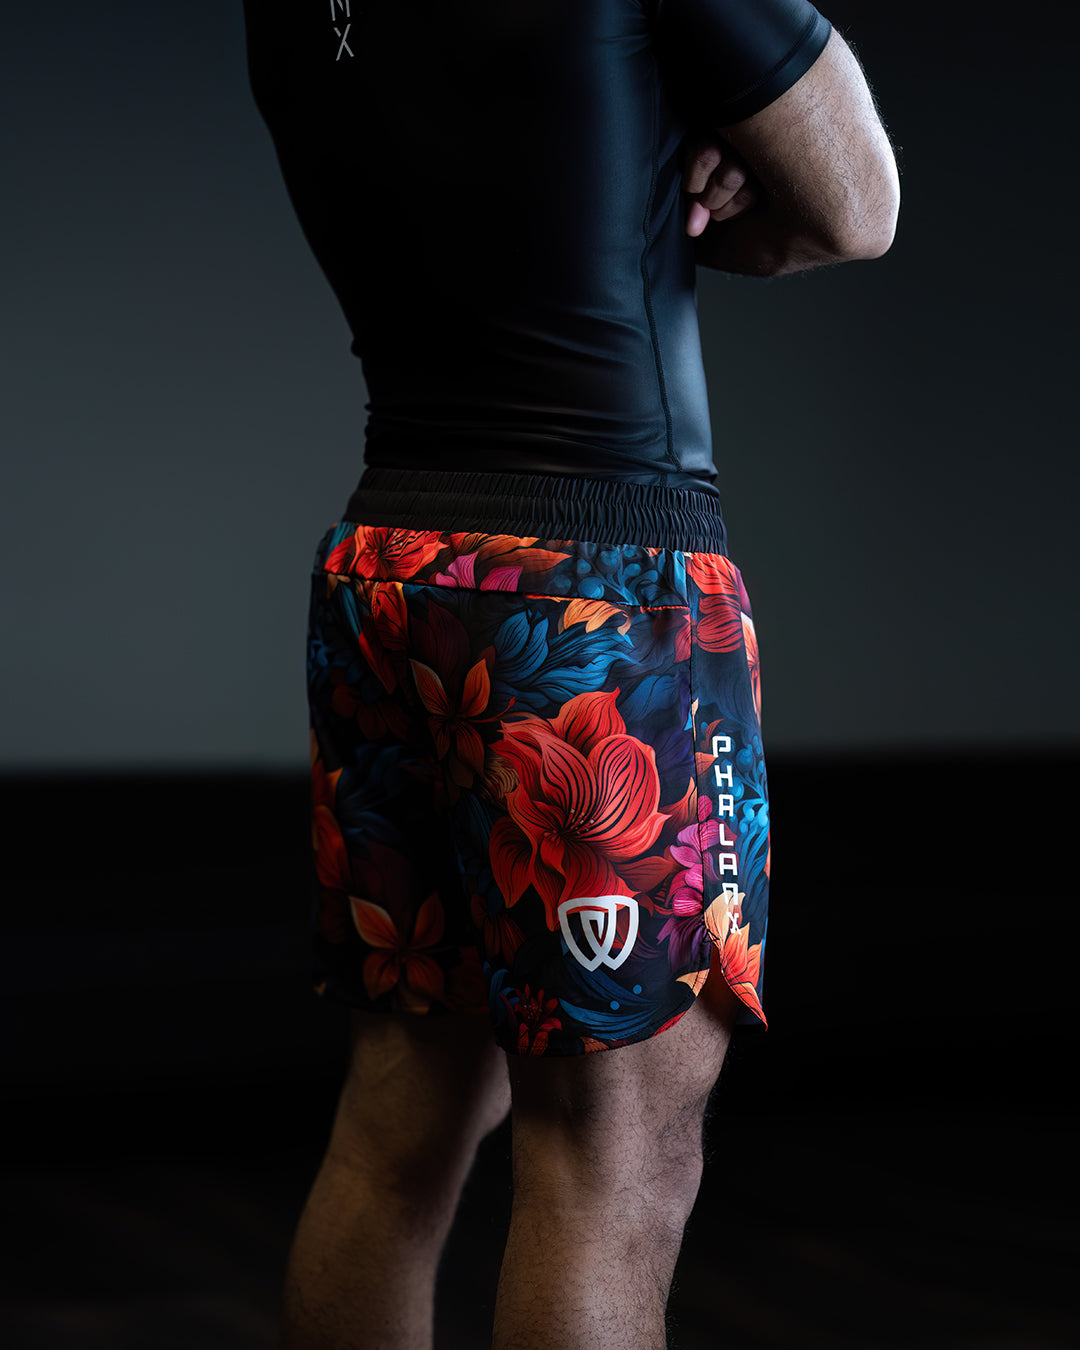 FLEO - Apex Contour Shorts, Bounce, Single Lined – These Fists Fly